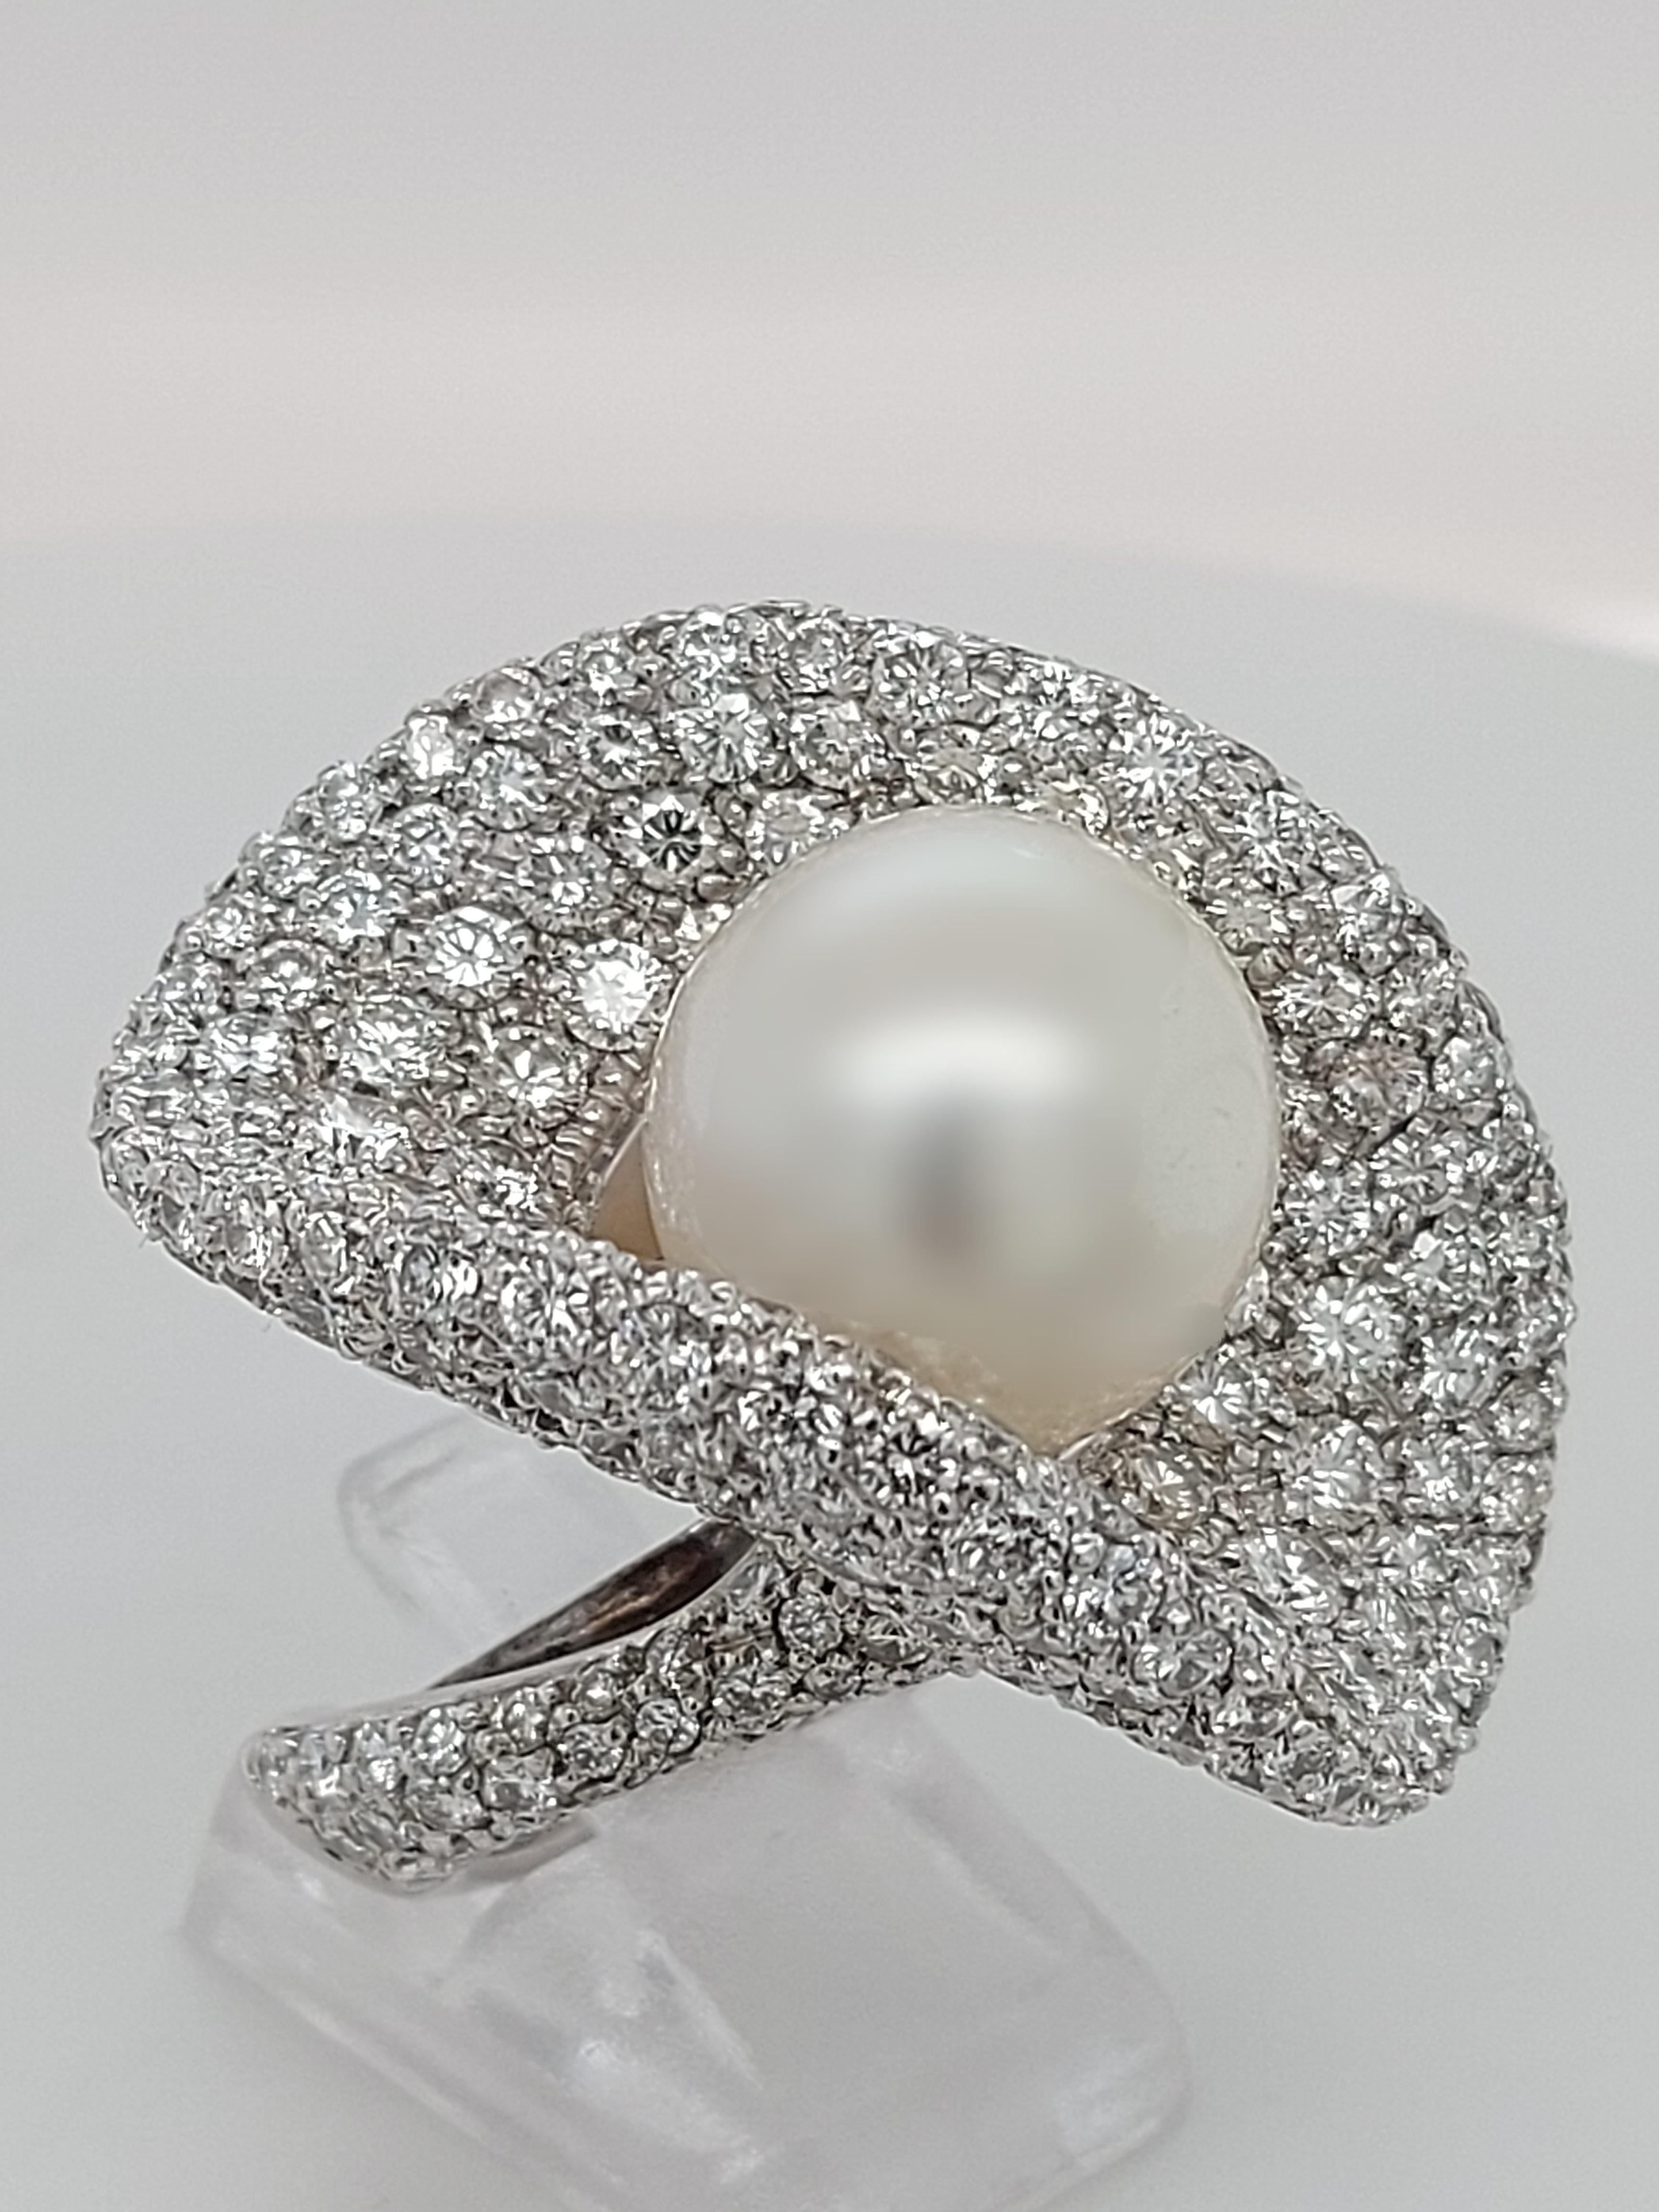 Magnificent 18kt white gold ring with diamonds and a big South Sea 14.3 mm pearl

Diamonds: 350 brilliant cut diamonds, Total :  Ca. 14.50 Carat of Top color and clarity diamonds.

Pearl: South Sea 14.3 mm

Material: 18kt solid white gold

Total